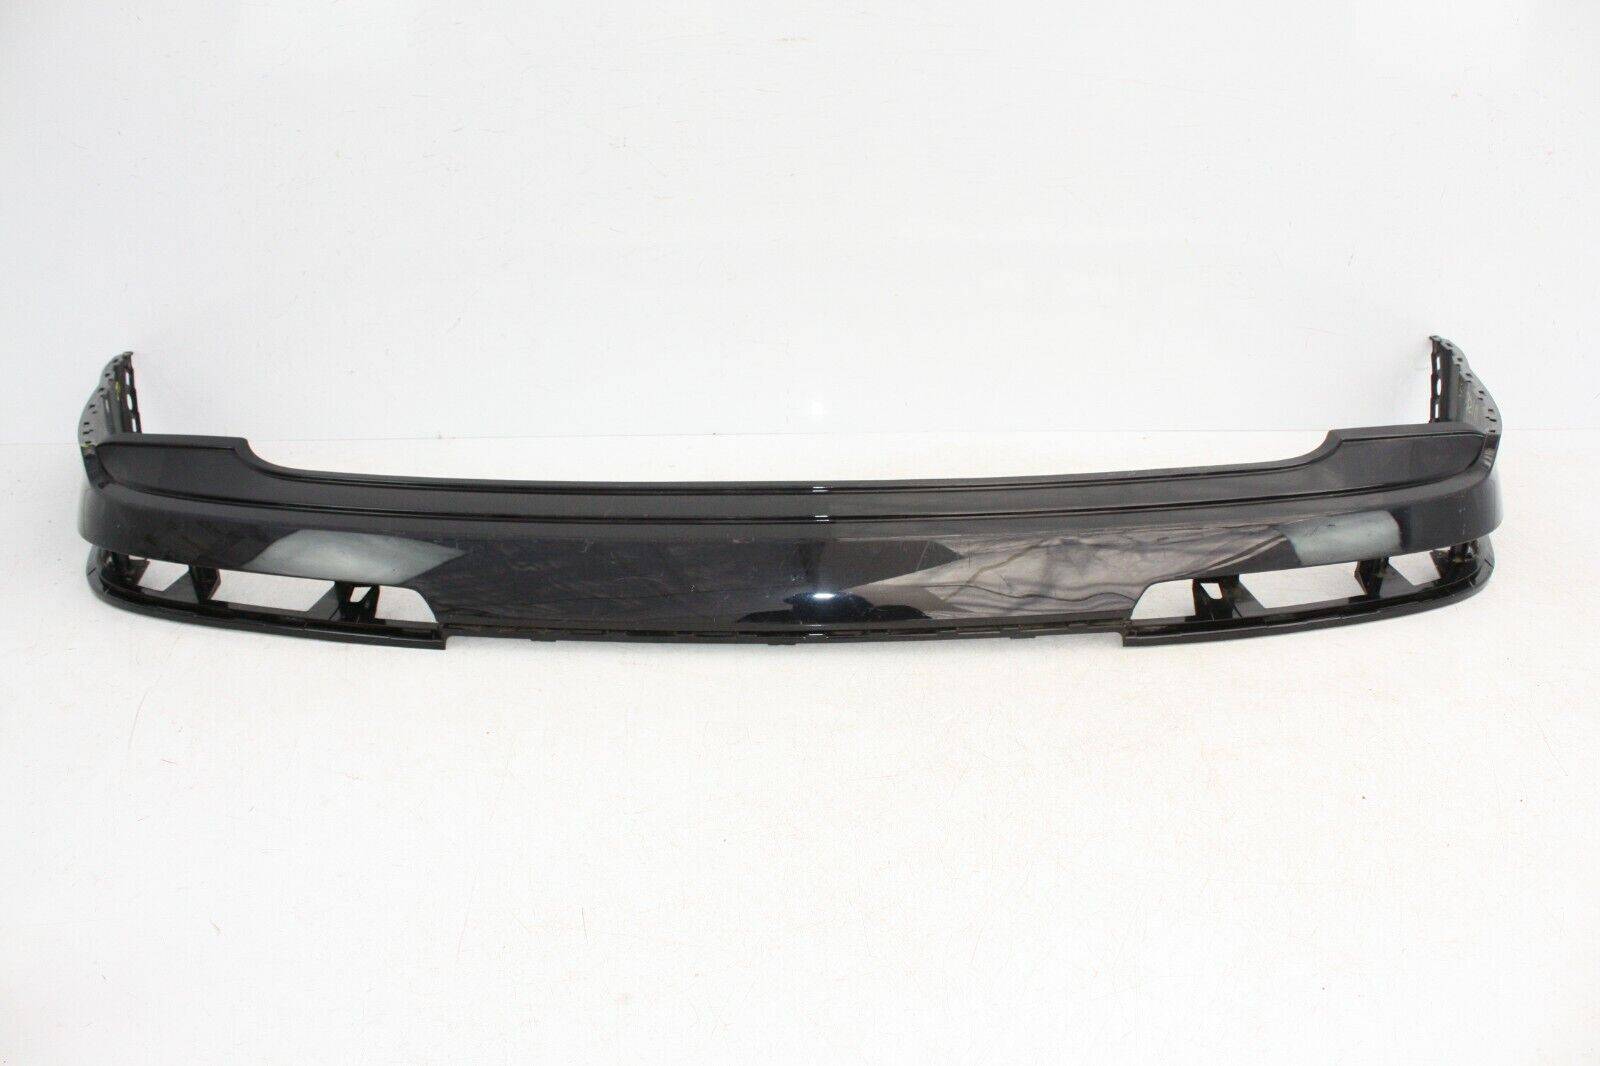 Audi-Q7-S-Line-Rear-Bumper-Upper-Section-2015-TO-2019-4M0807511-175902924573